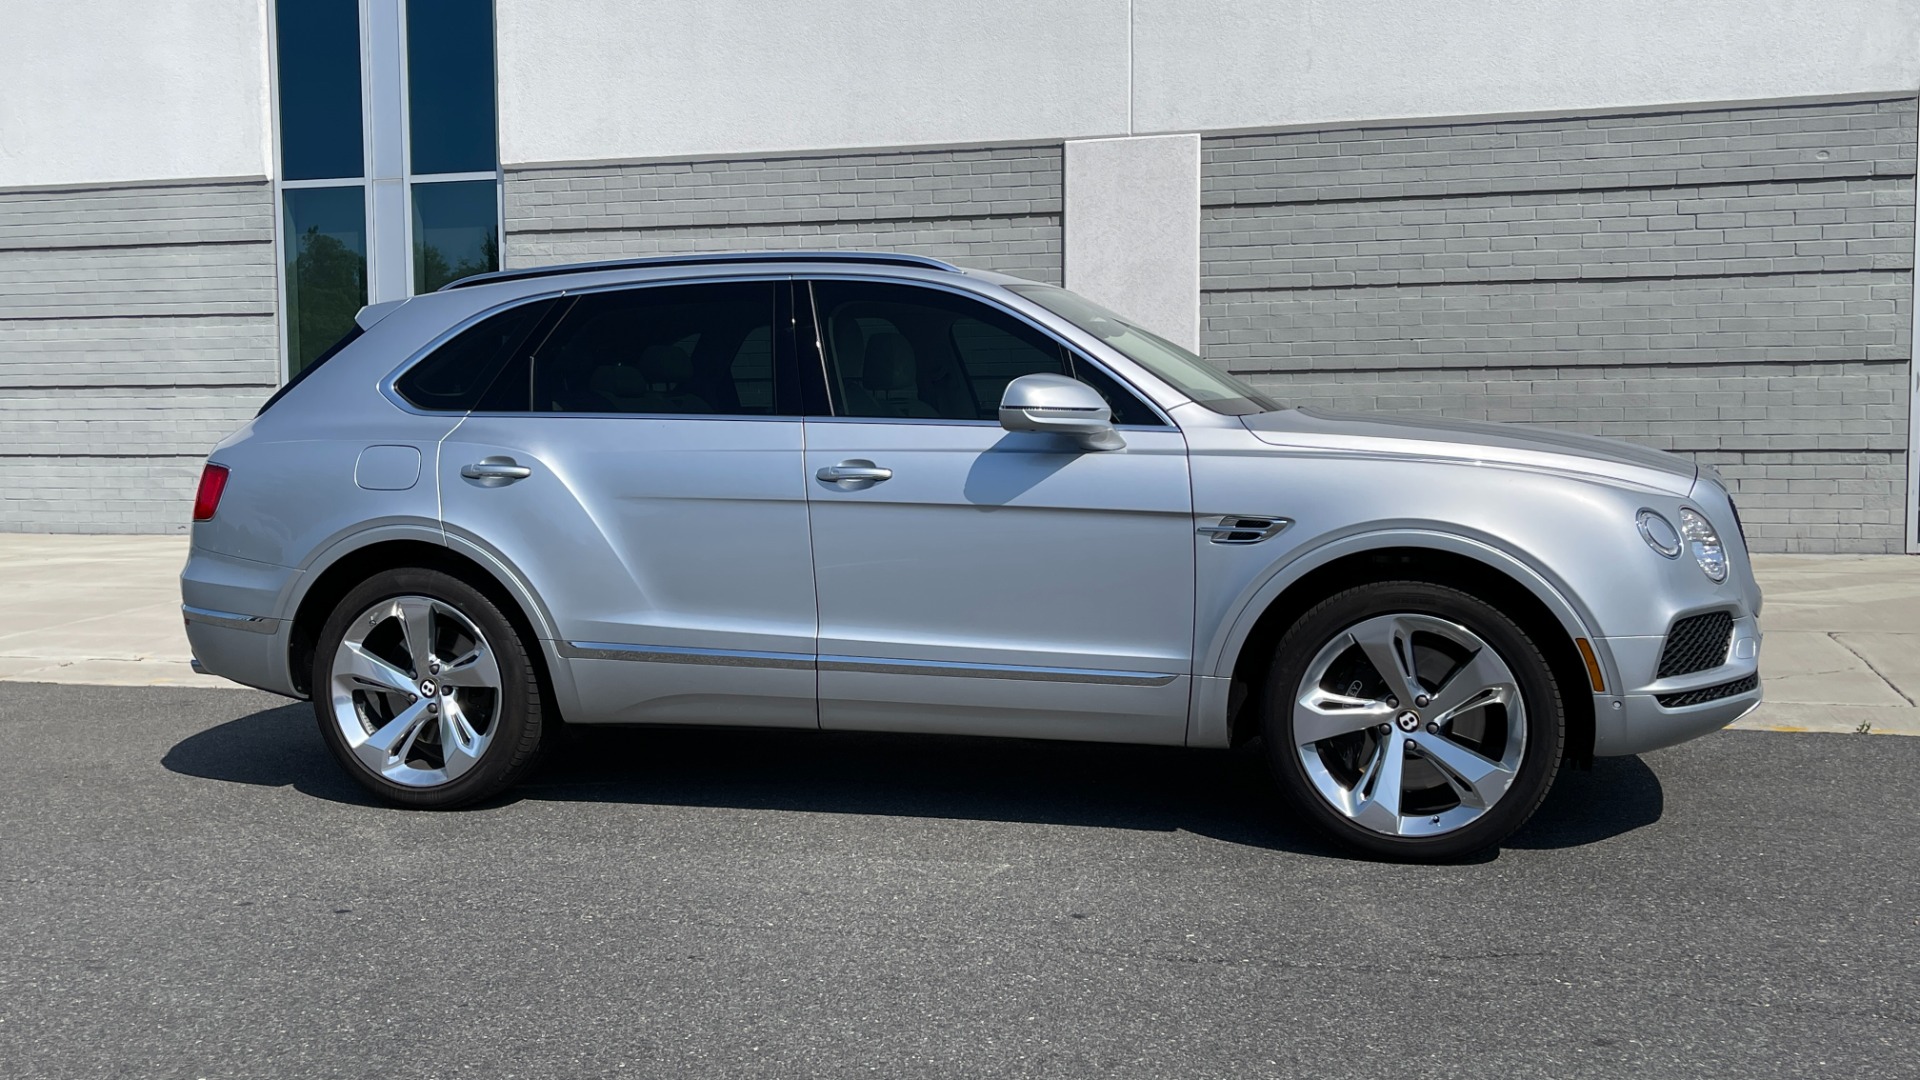 Used 2019 Bentley BENTAYGA V8 / AWD / NAV / SUNROOF / LED LIGHTING / PREMIUM AUDIO / REARVIEW for sale $163,900 at Formula Imports in Charlotte NC 28227 9